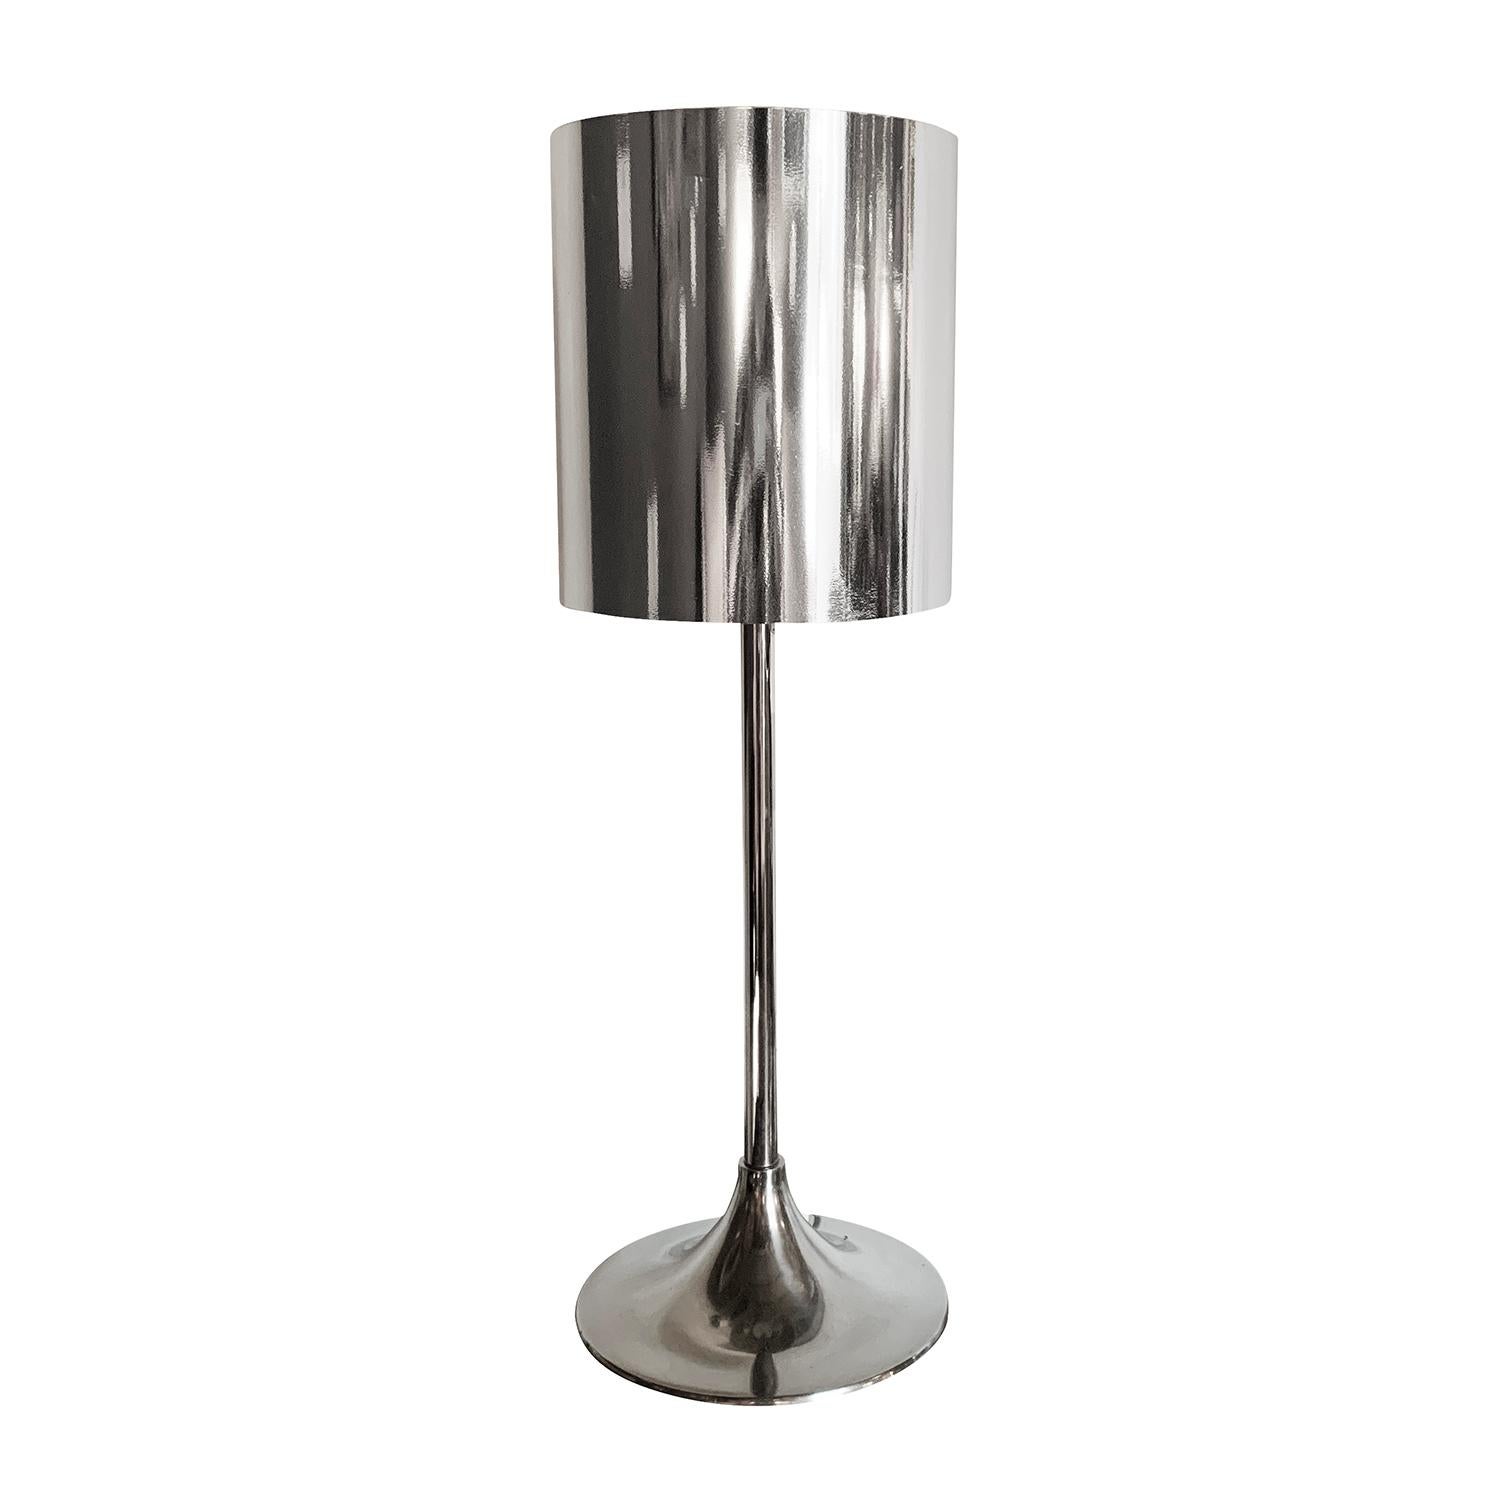 A silver, vintage Mid-Century Modern Swedish table lamp made of chromium, featuring a one light socket, in good condition. The Scandinavian desk light was designed by Hans Agne Jakobsson. Model, Lot Nr. BN19. The wires have been renewed. Minor